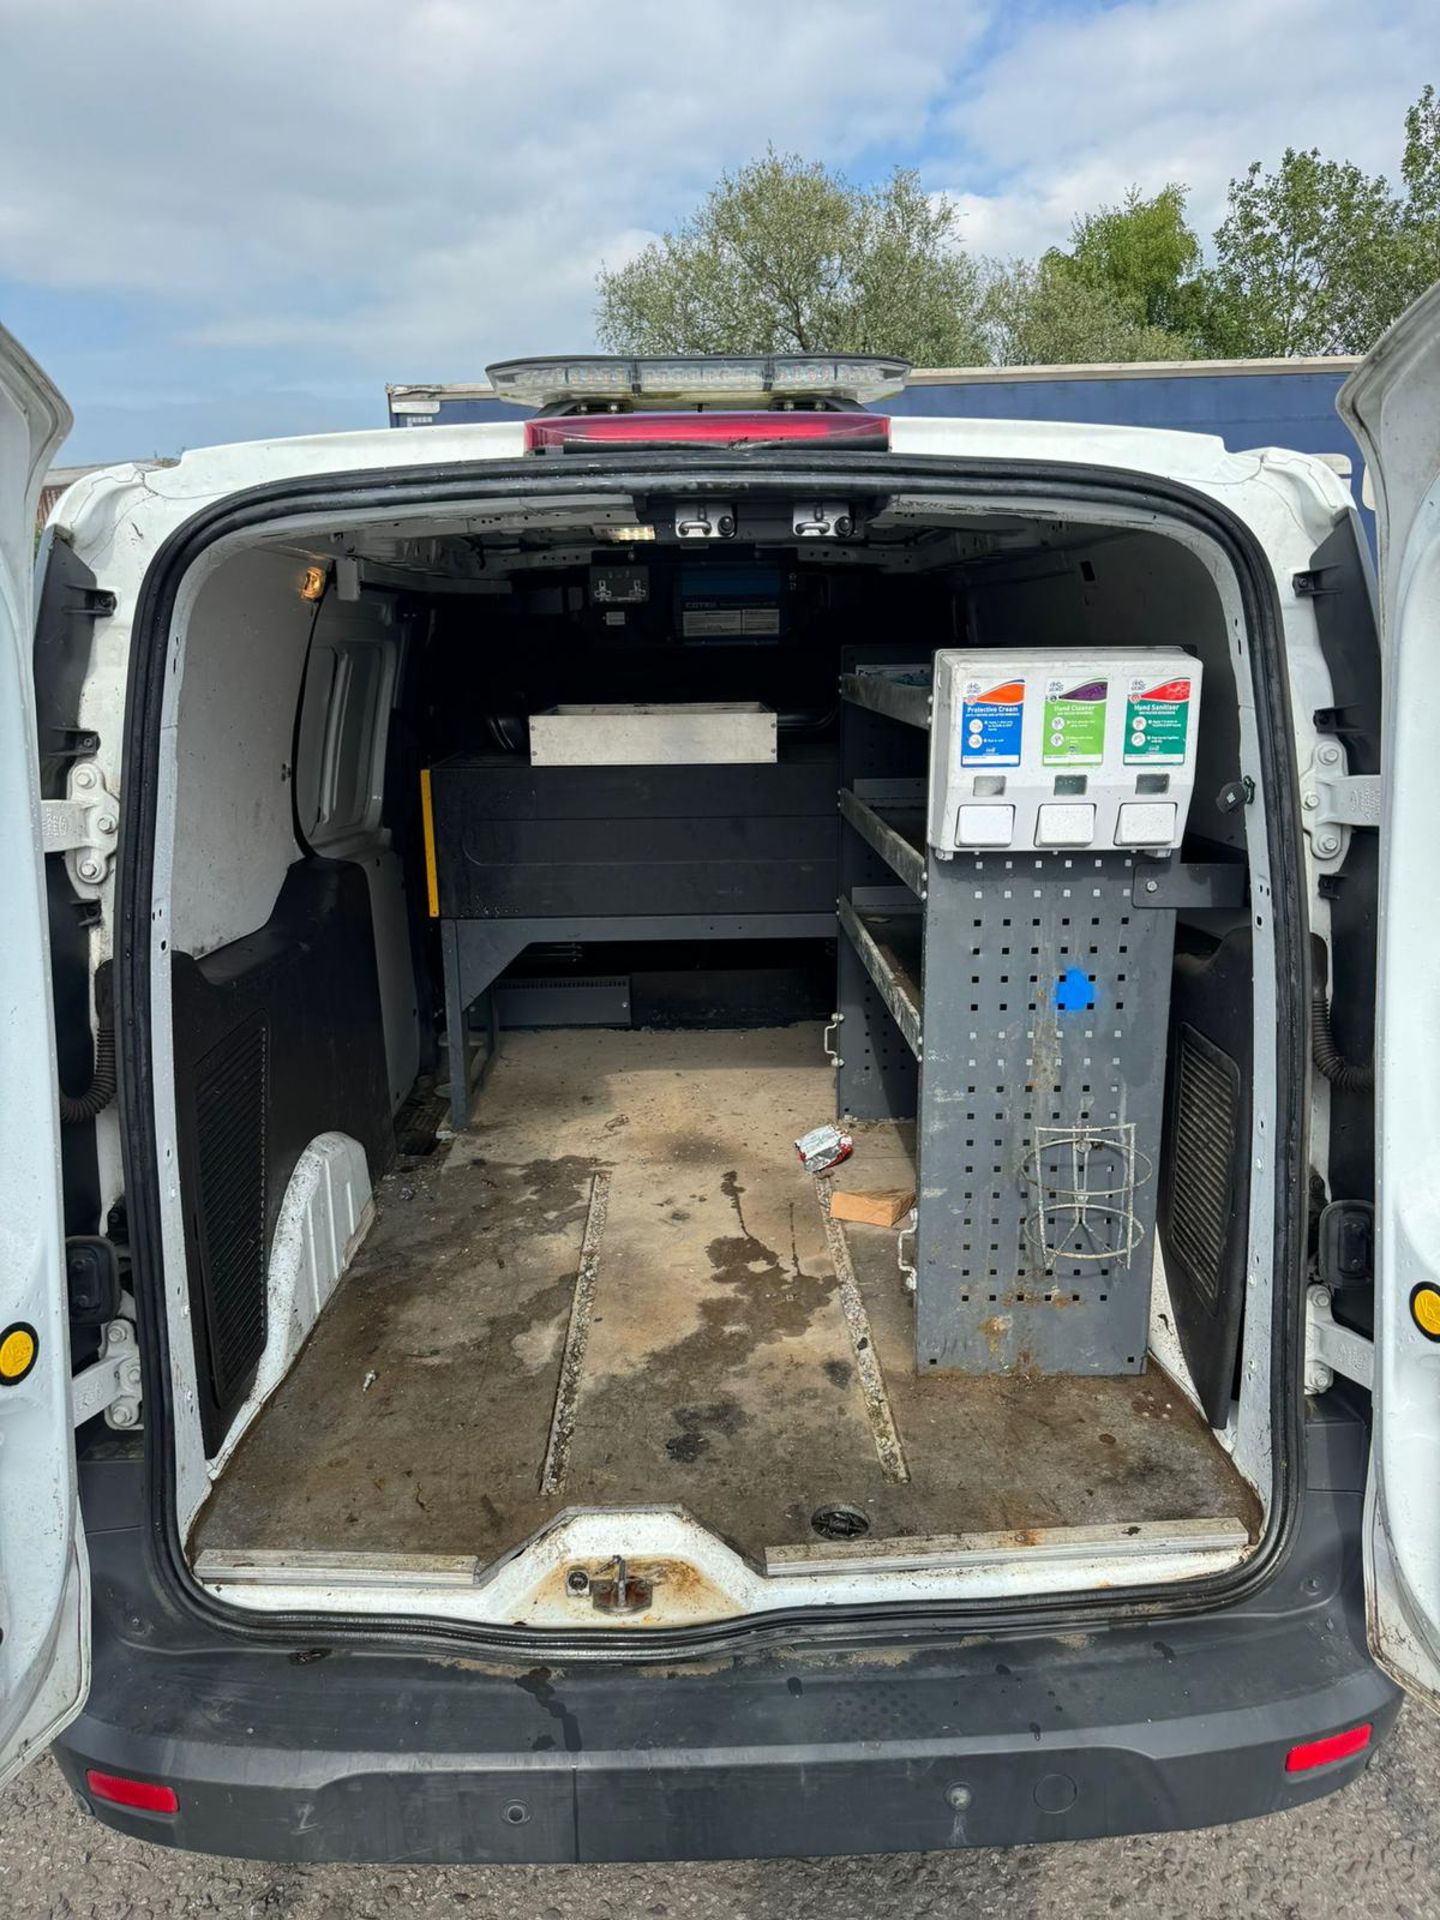 2016 66 FORD TRANSIT CONNECT LWB PANEL VAN - 123K MILES - AIR CON - Image 3 of 6